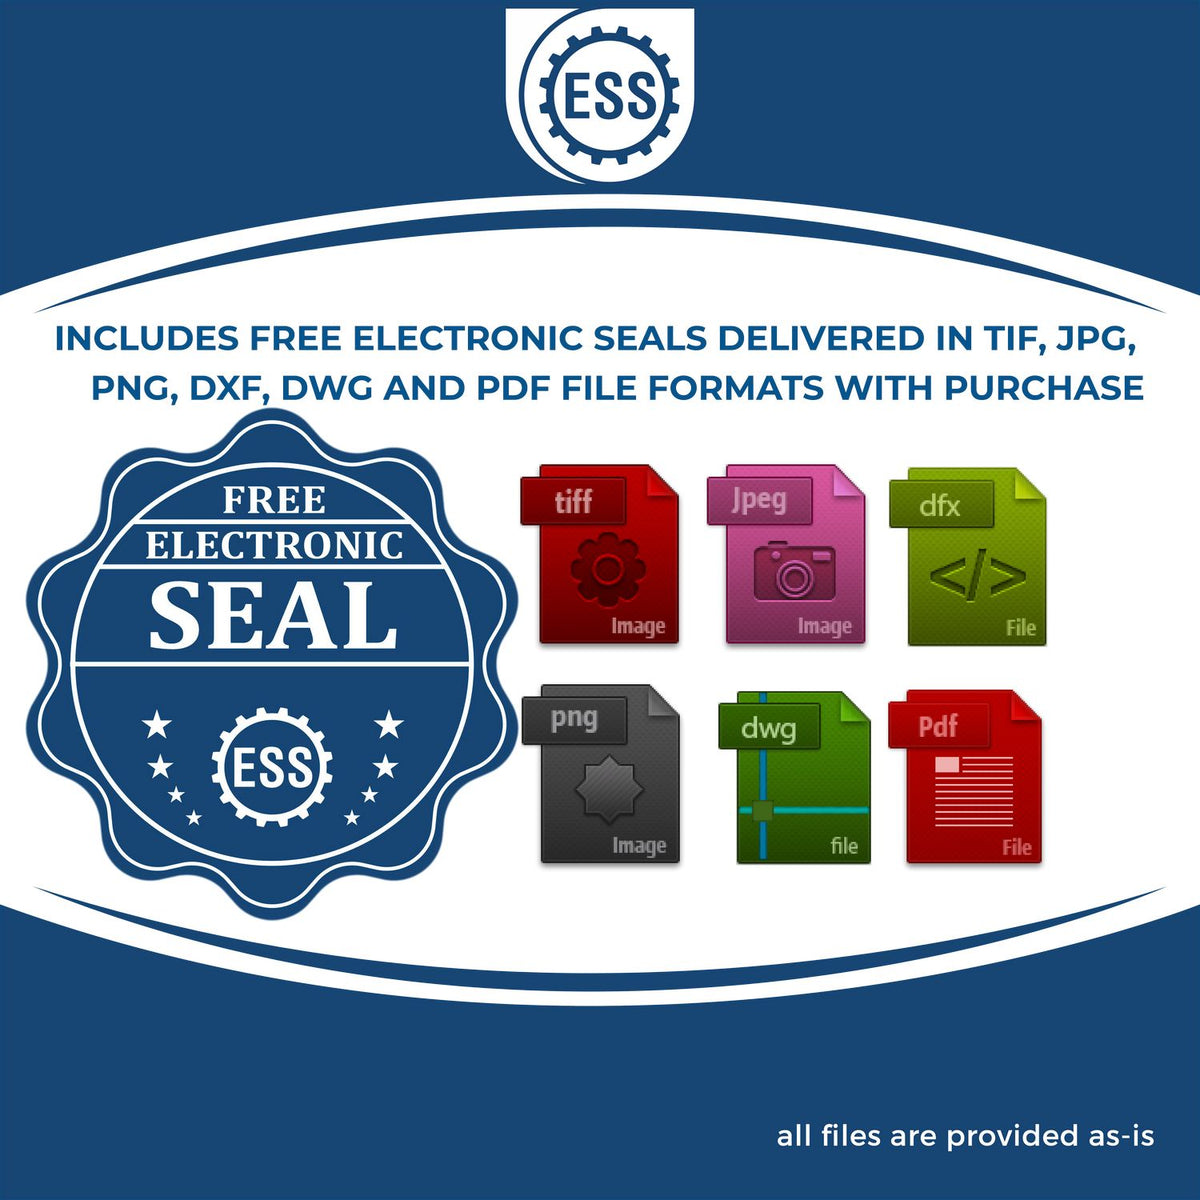 An infographic for the free electronic seal for the PSI Arizona Notary Stamp illustrating the different file type icons such as DXF, DWG, TIF, JPG and PNG.